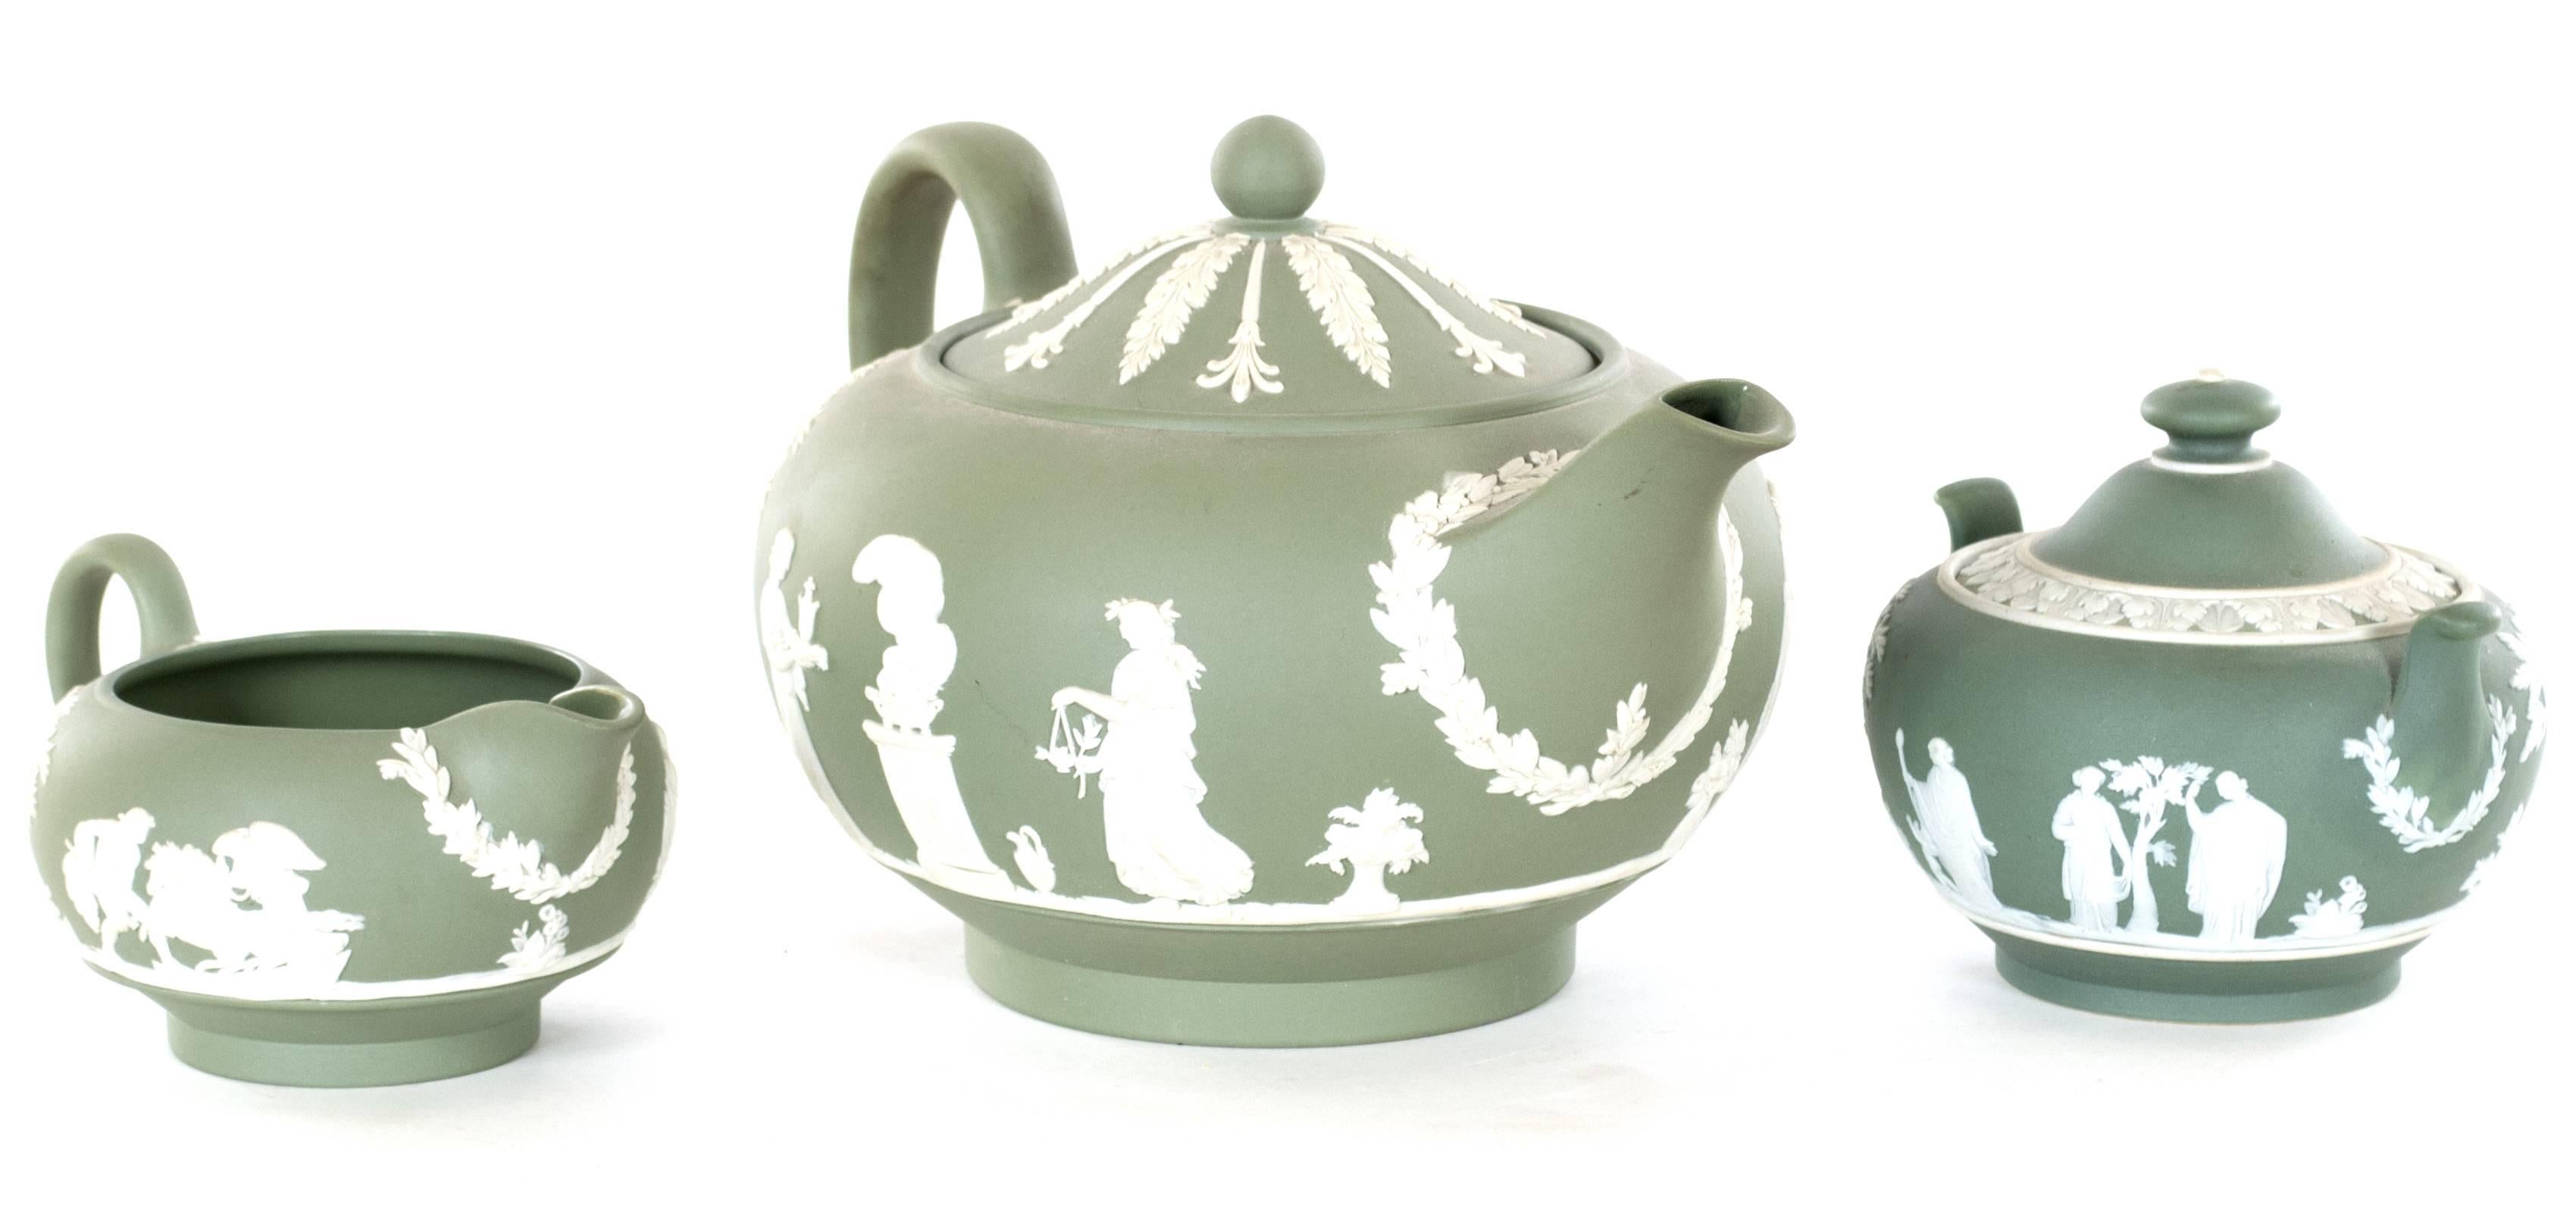 A matching set, including a teapot, sugar bowl, and creamer in the iconic jasperware green porcelain bisque with white, classical figures. The base of each is stamped 